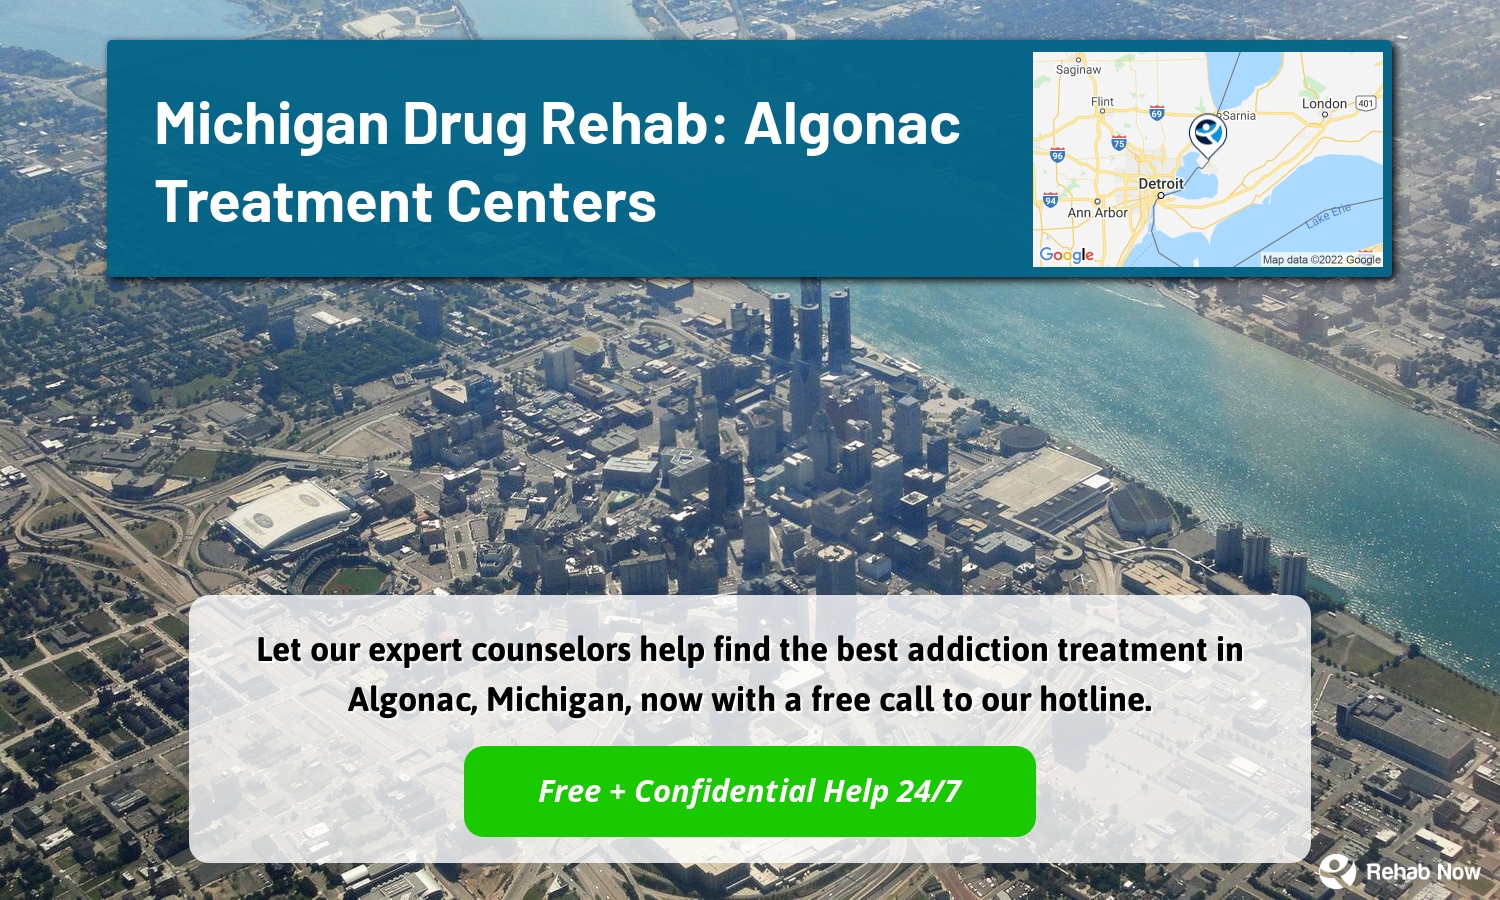 Let our expert counselors help find the best addiction treatment in Algonac, Michigan, now with a free call to our hotline.